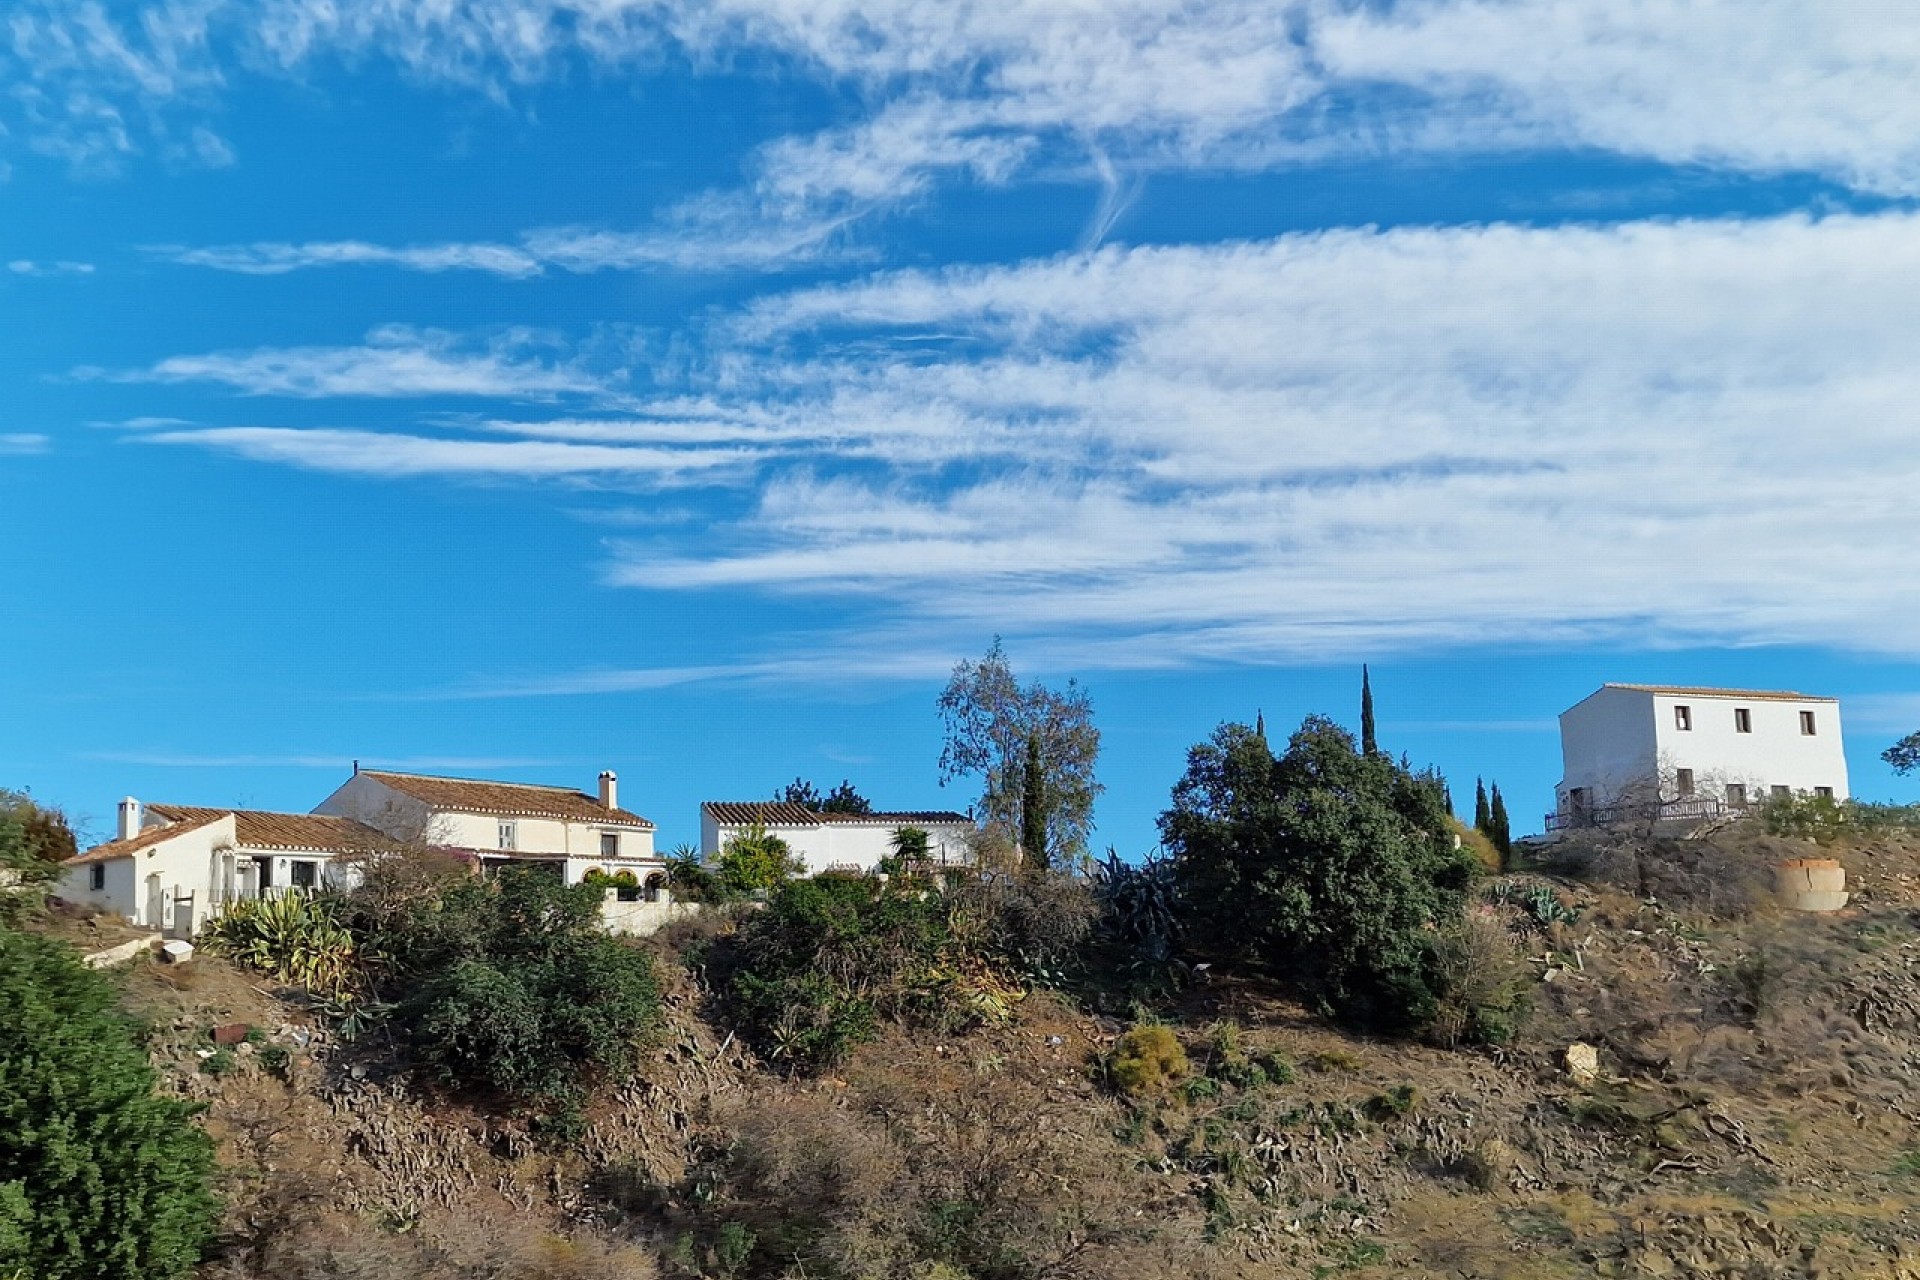 Reventa - Town house -
Comares - Inland